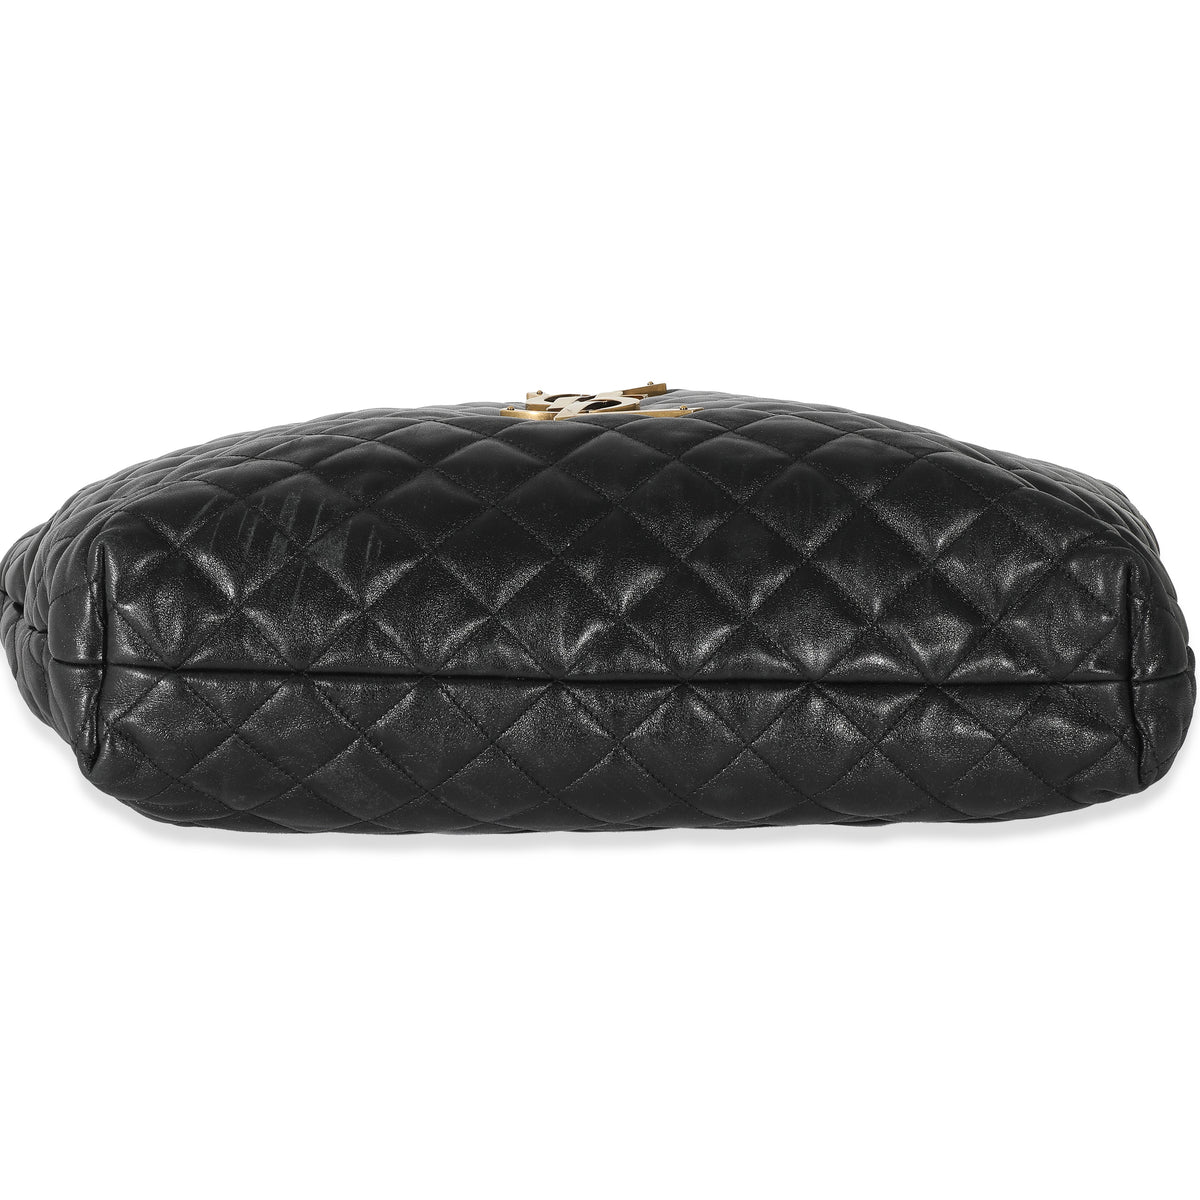 ICARE maxi shopping bag in quilted lambskin, Saint Laurent